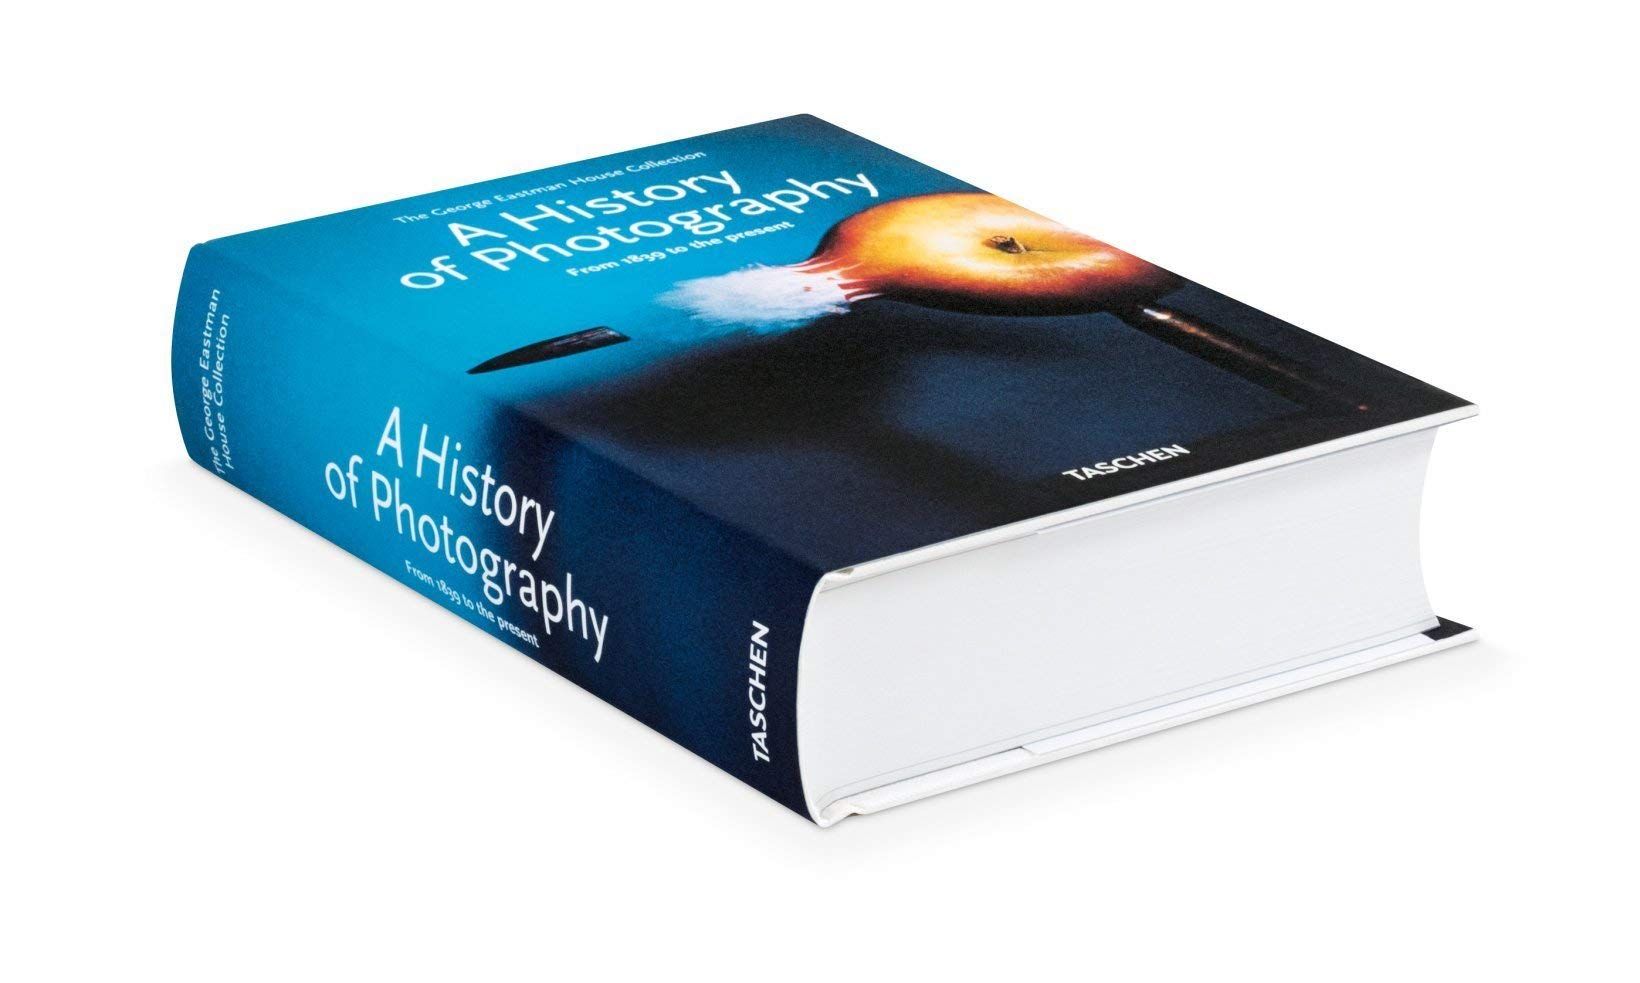  A History of Photography_Therese Mulligan_9783836540995_Taschen 